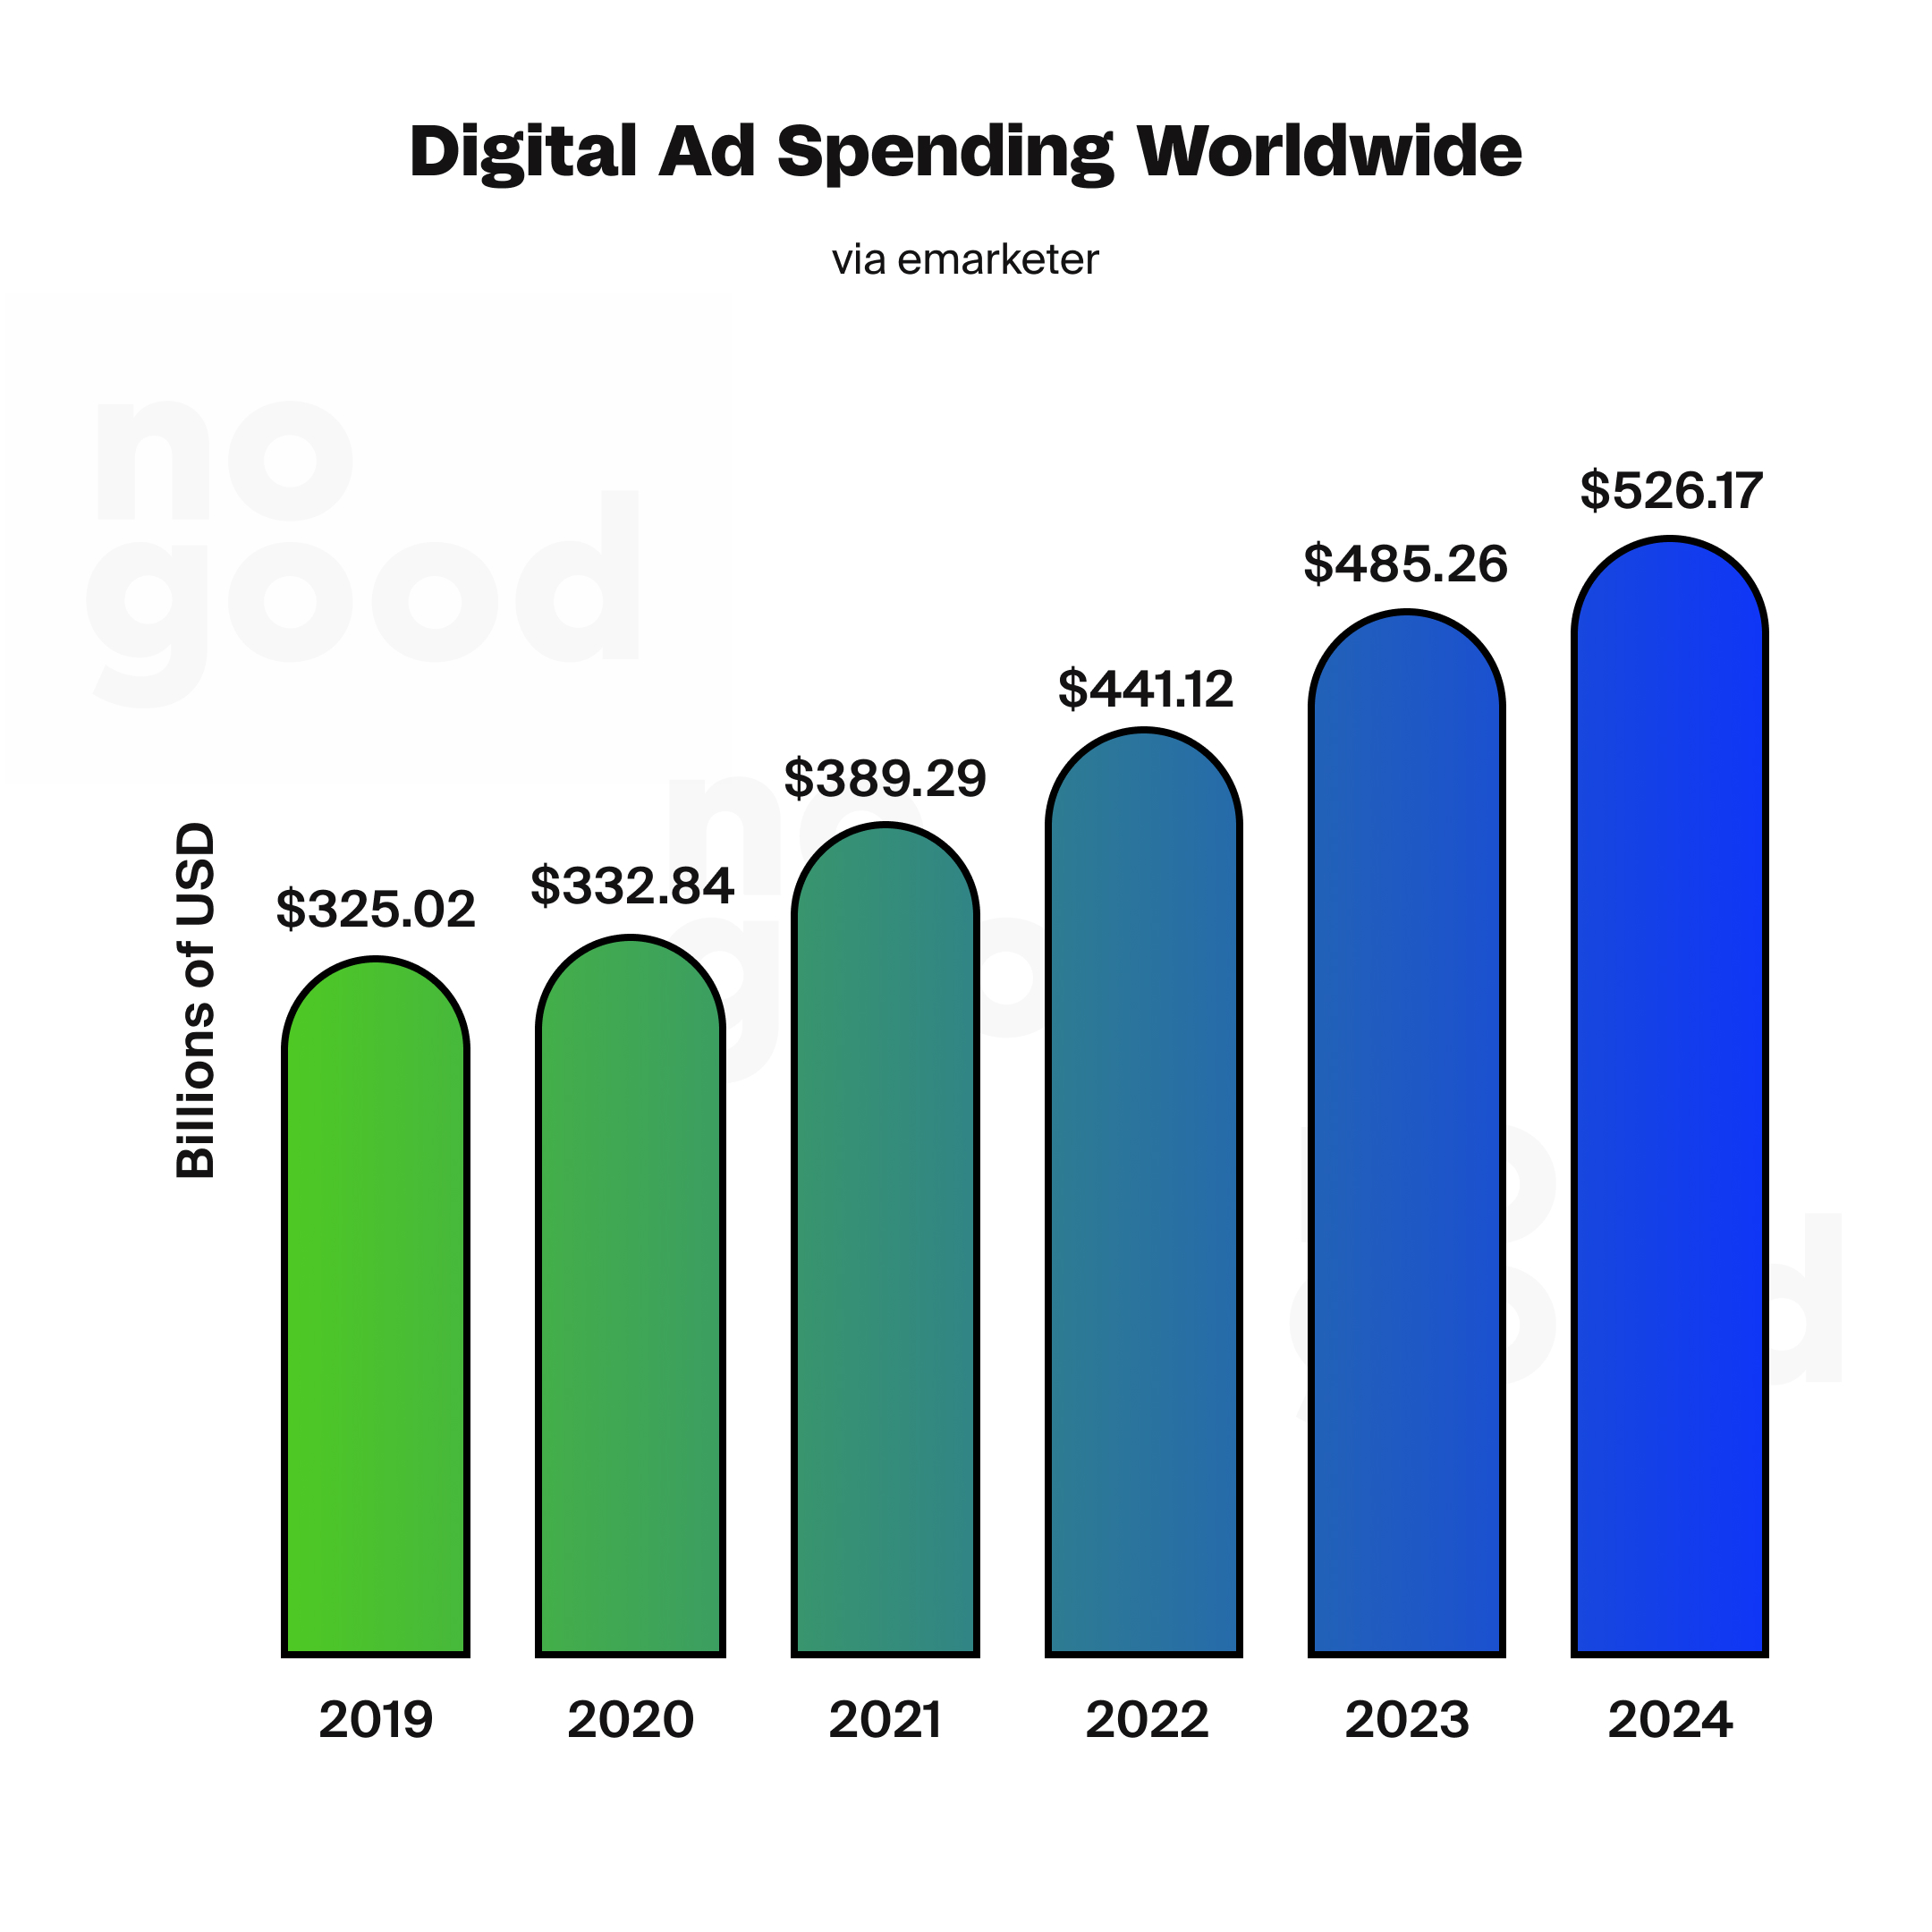 Digital ad spending worldwide shows the billions of USD increasing yearly.